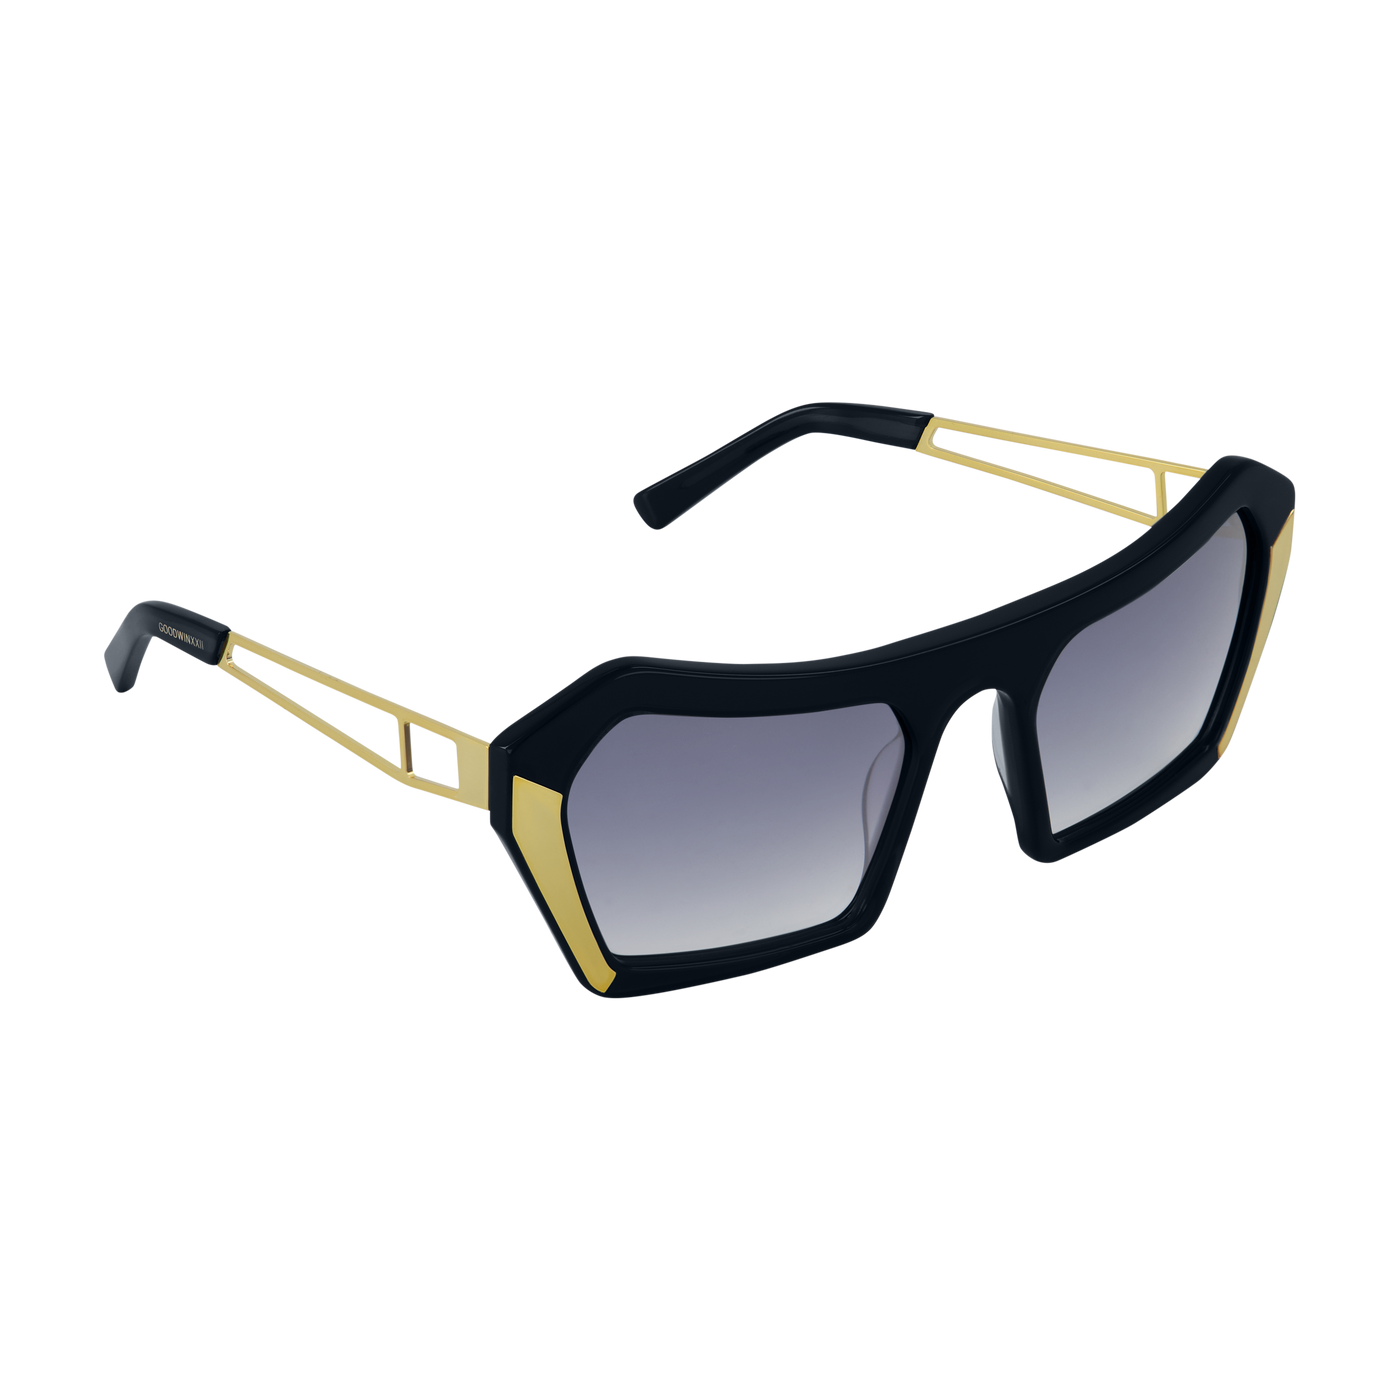 side view of women's designer oversized black and gold sunglasses